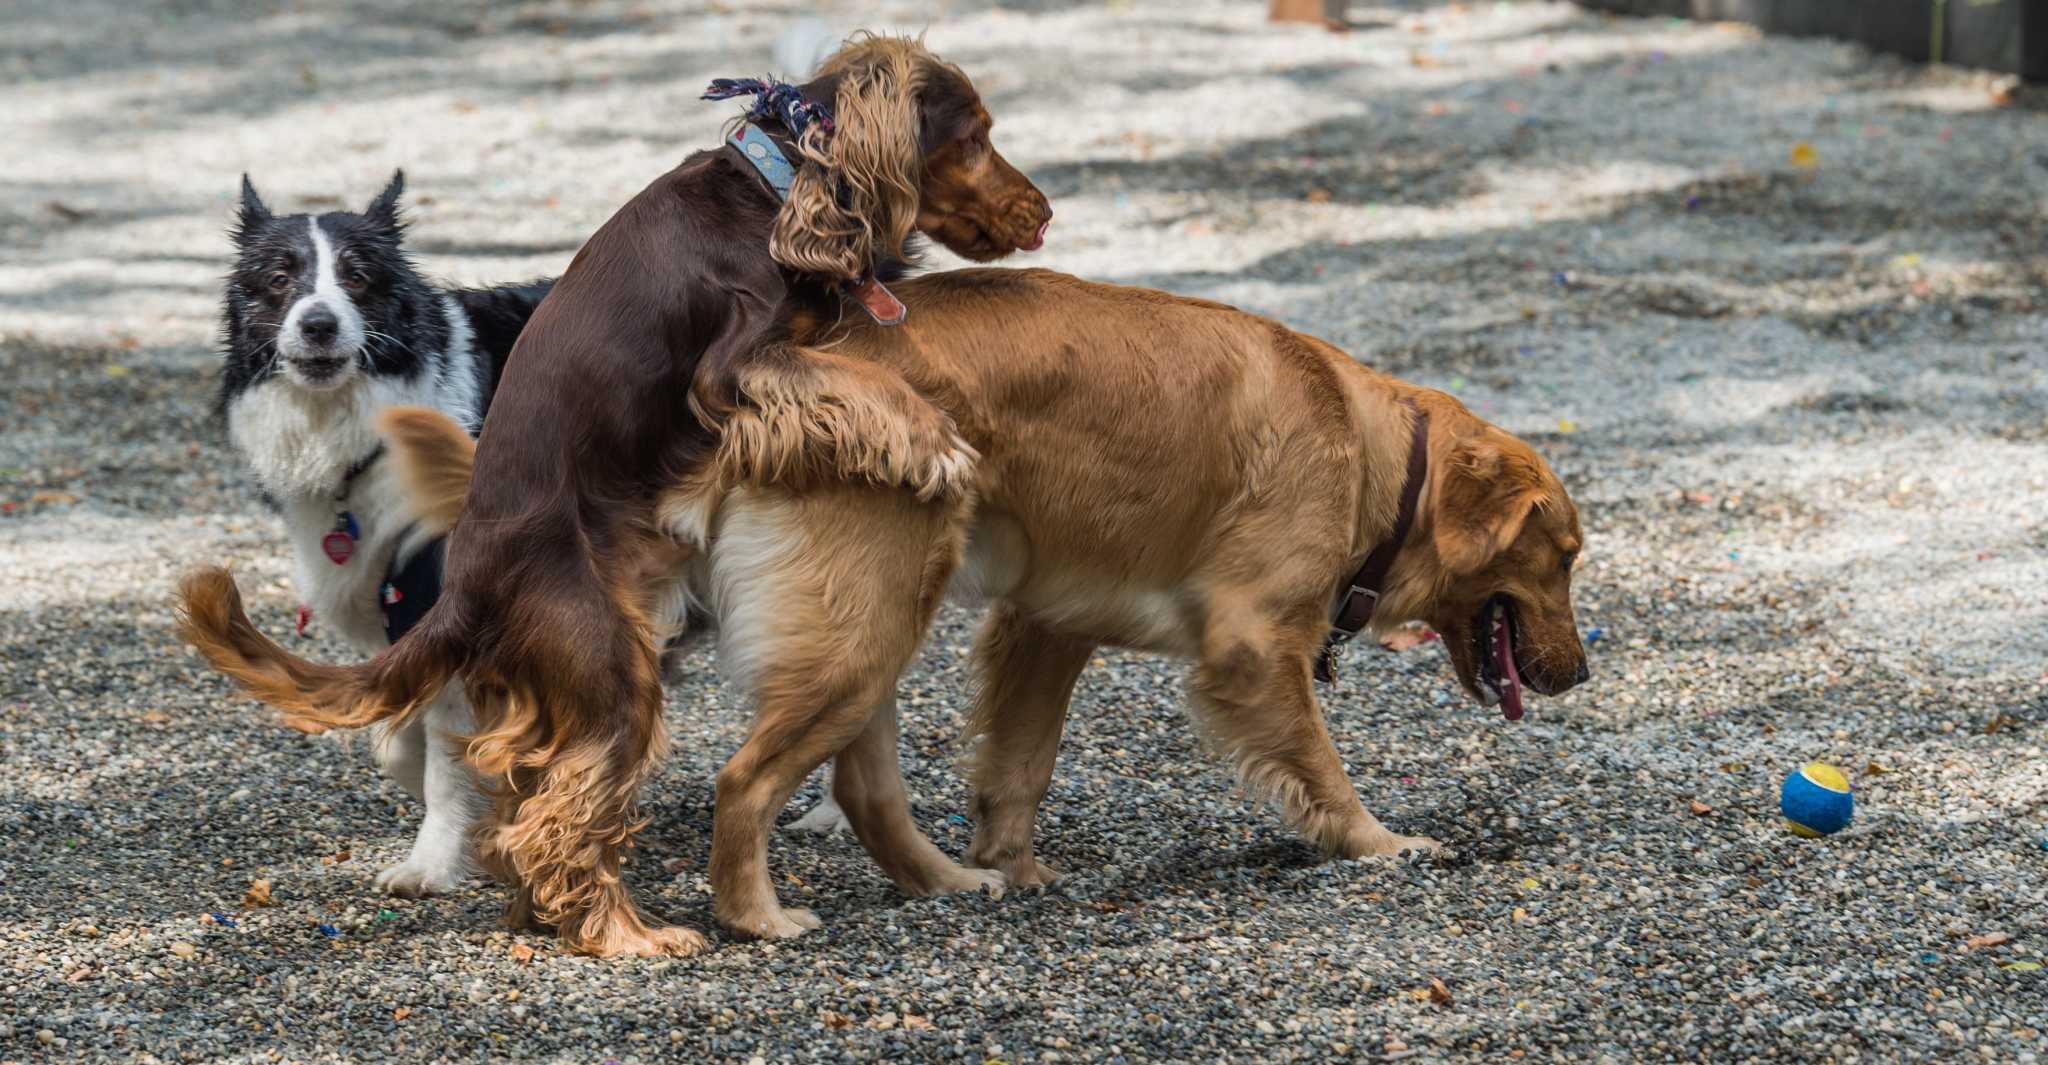 Why do female dogs mount other dogs? Spoiler alert: it's about playing and  dominance, not sex